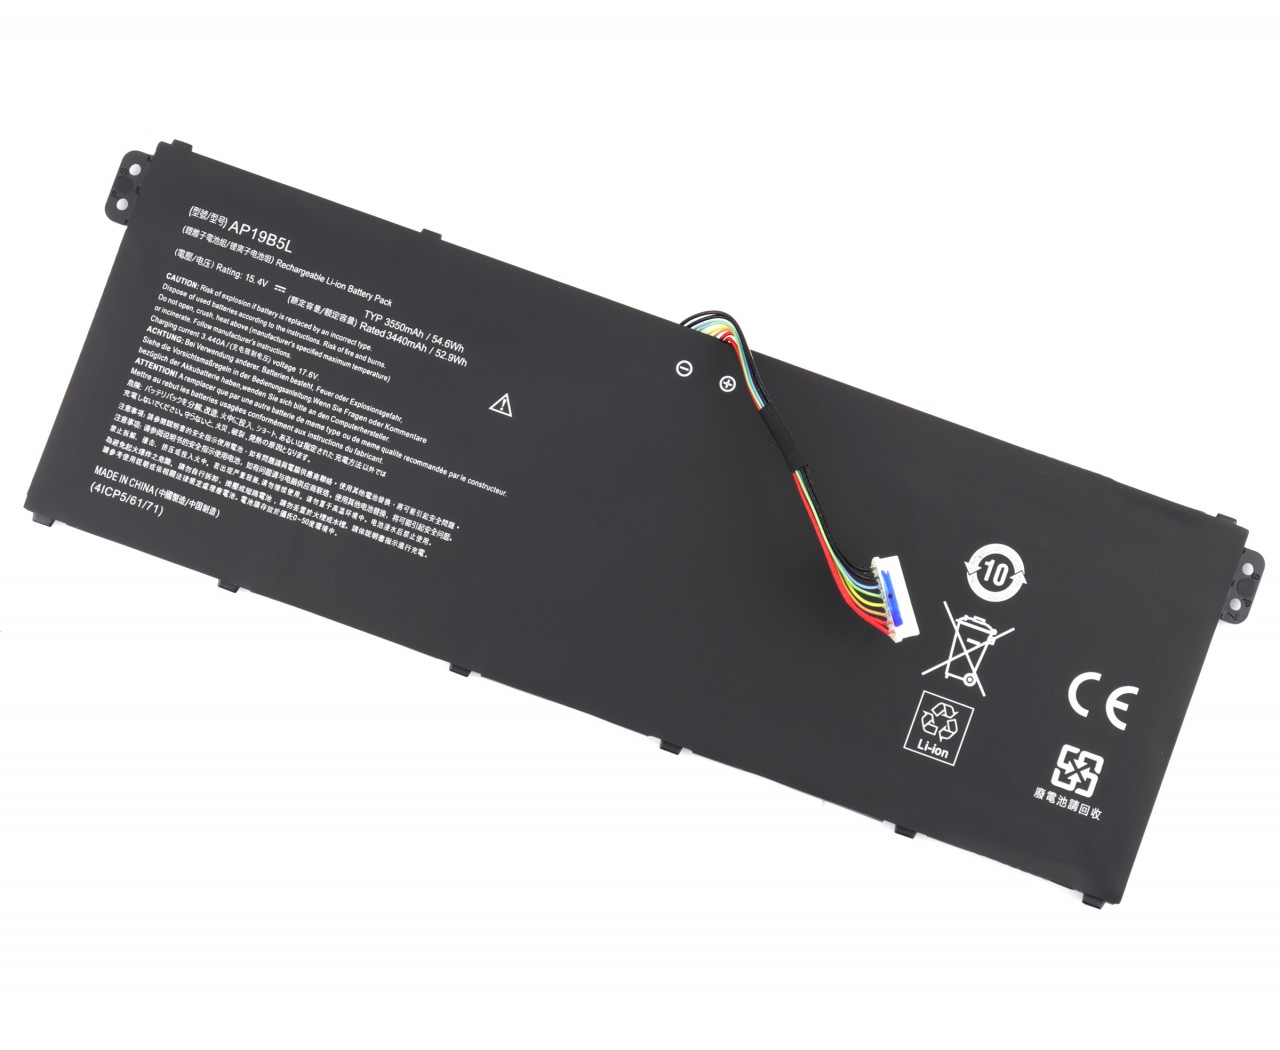 Baterie Acer Aspire 5 A515-43-R057 52.9Wh Protech High Quality Replacement